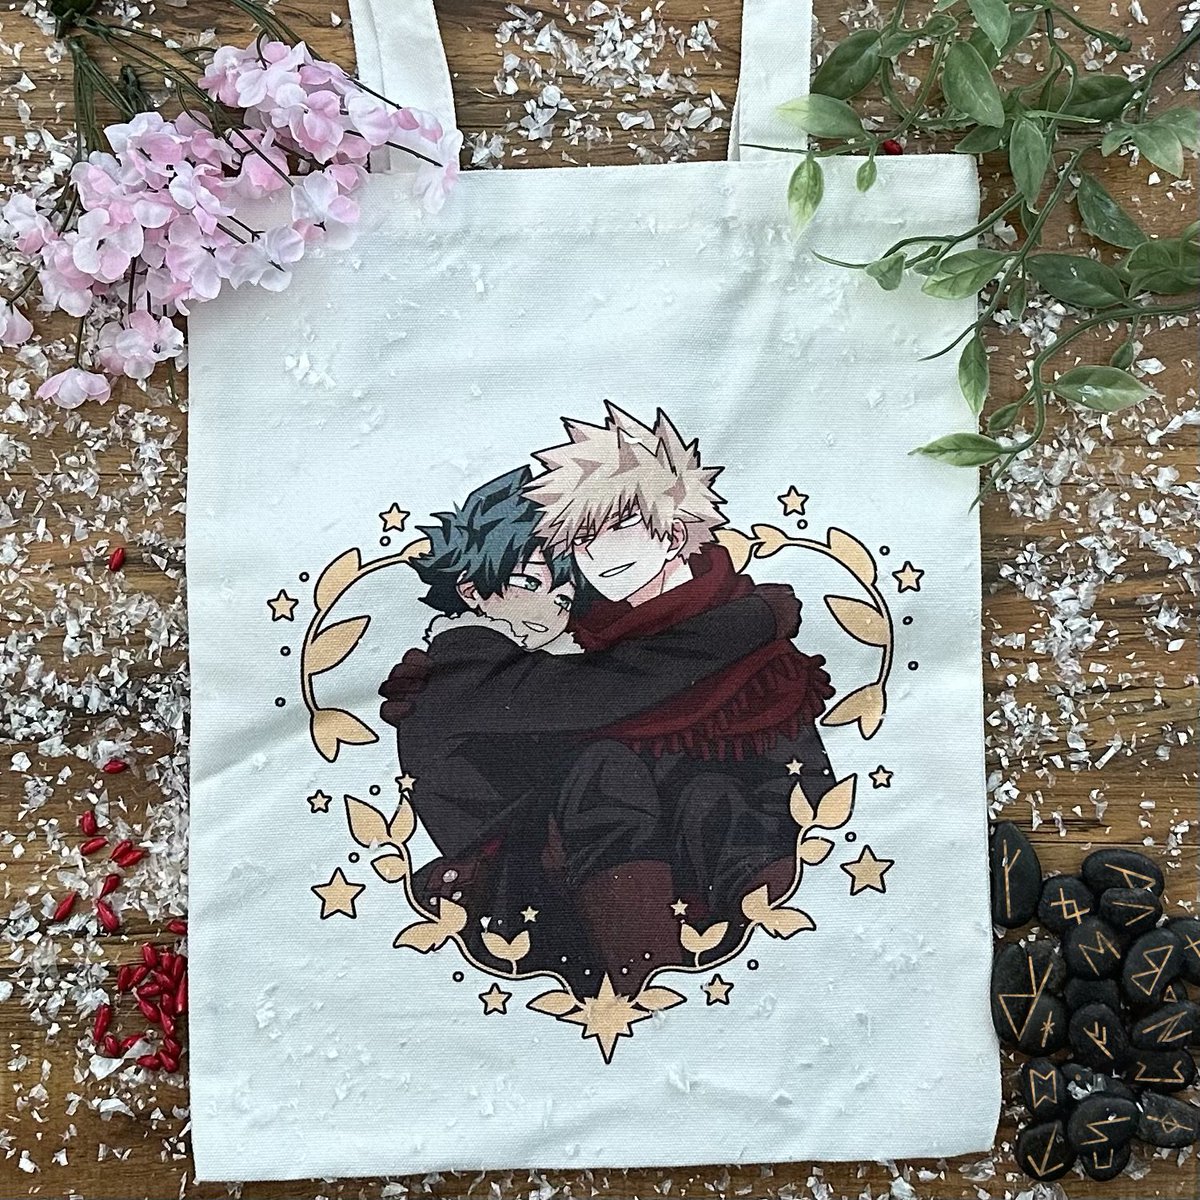 ❄️PRODUCTION UPDATE❄️

You'll tote-ally need to carry this sweet tote bag with you on your own adventures. We can't wait to ship these out to you. More updates coming soon!

#bkdkkazahana🐺🐏